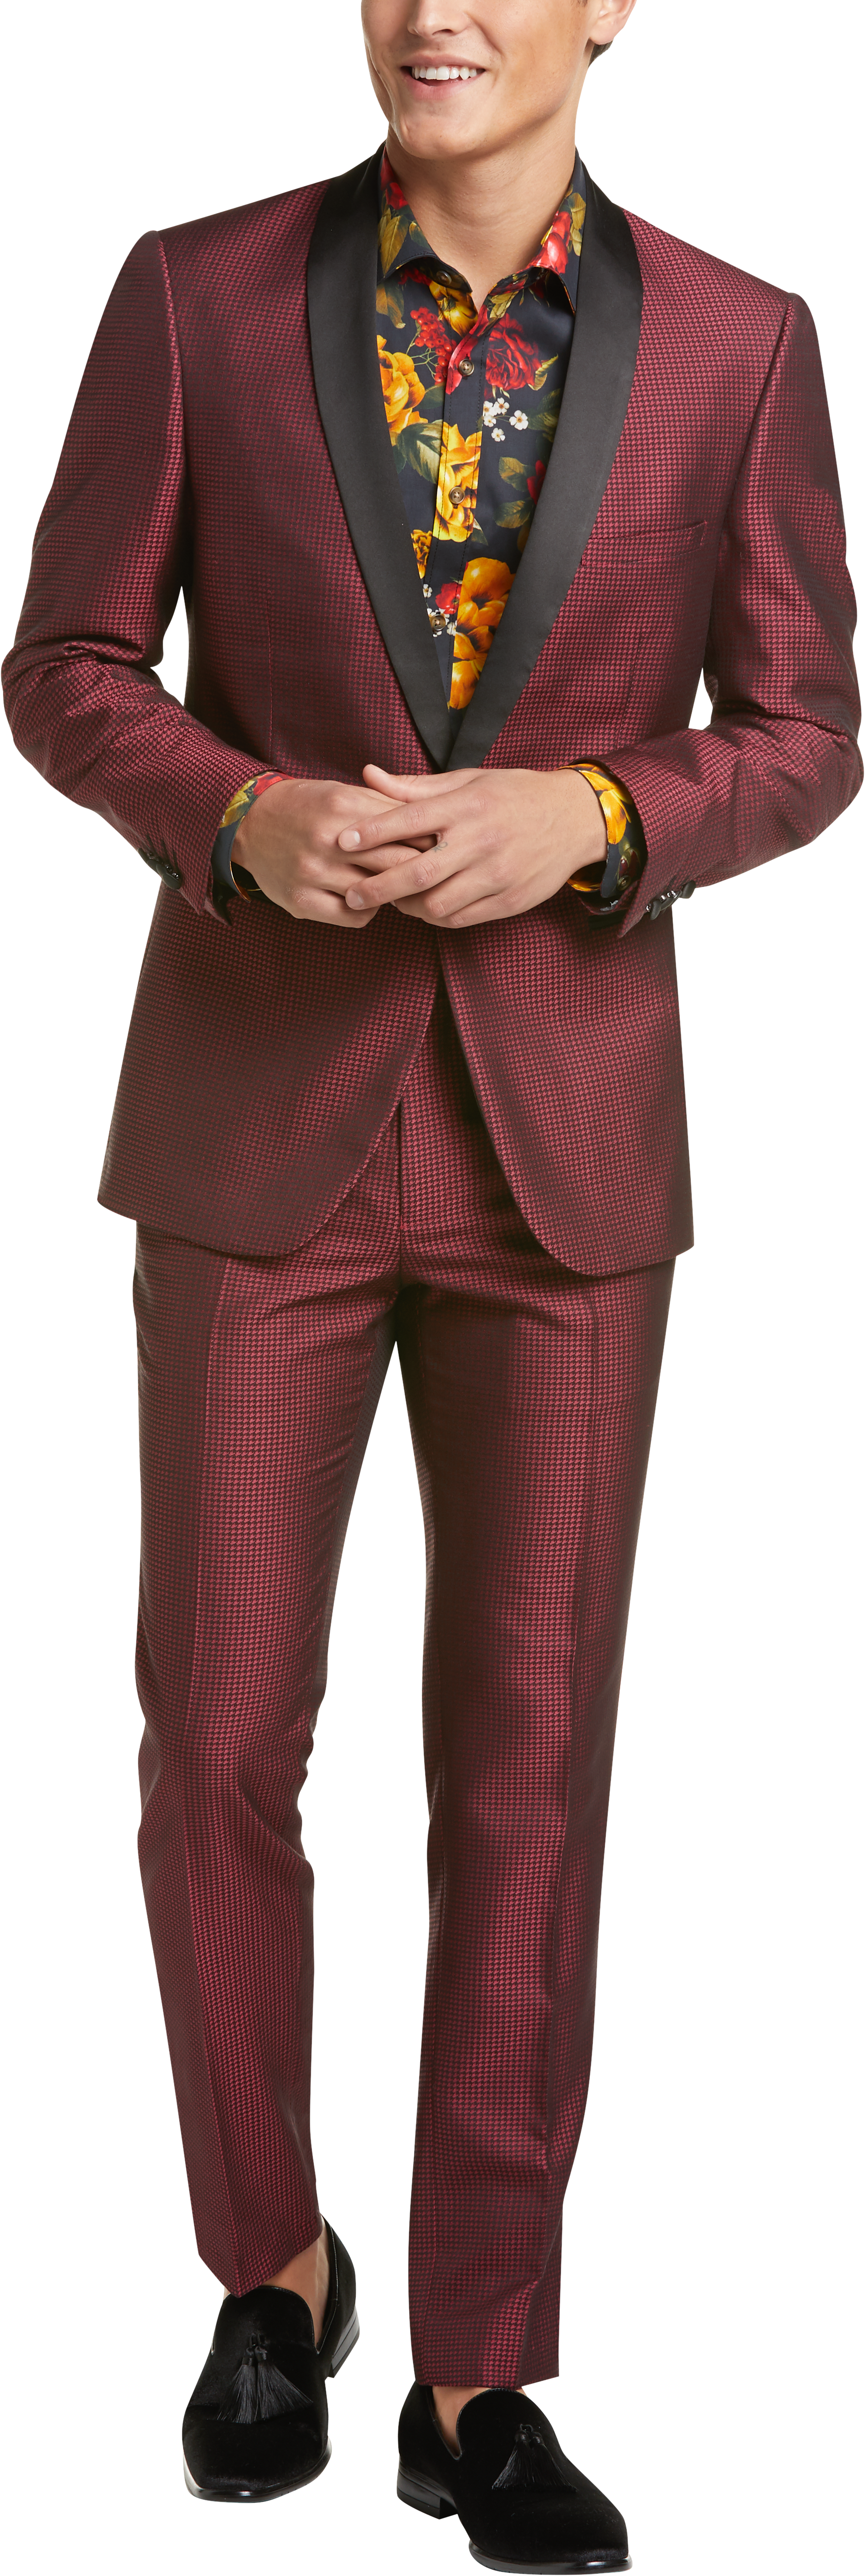 Paisley & Gray Slim Fit Suit Separates Coat, Red Houndstooth - Men's ...